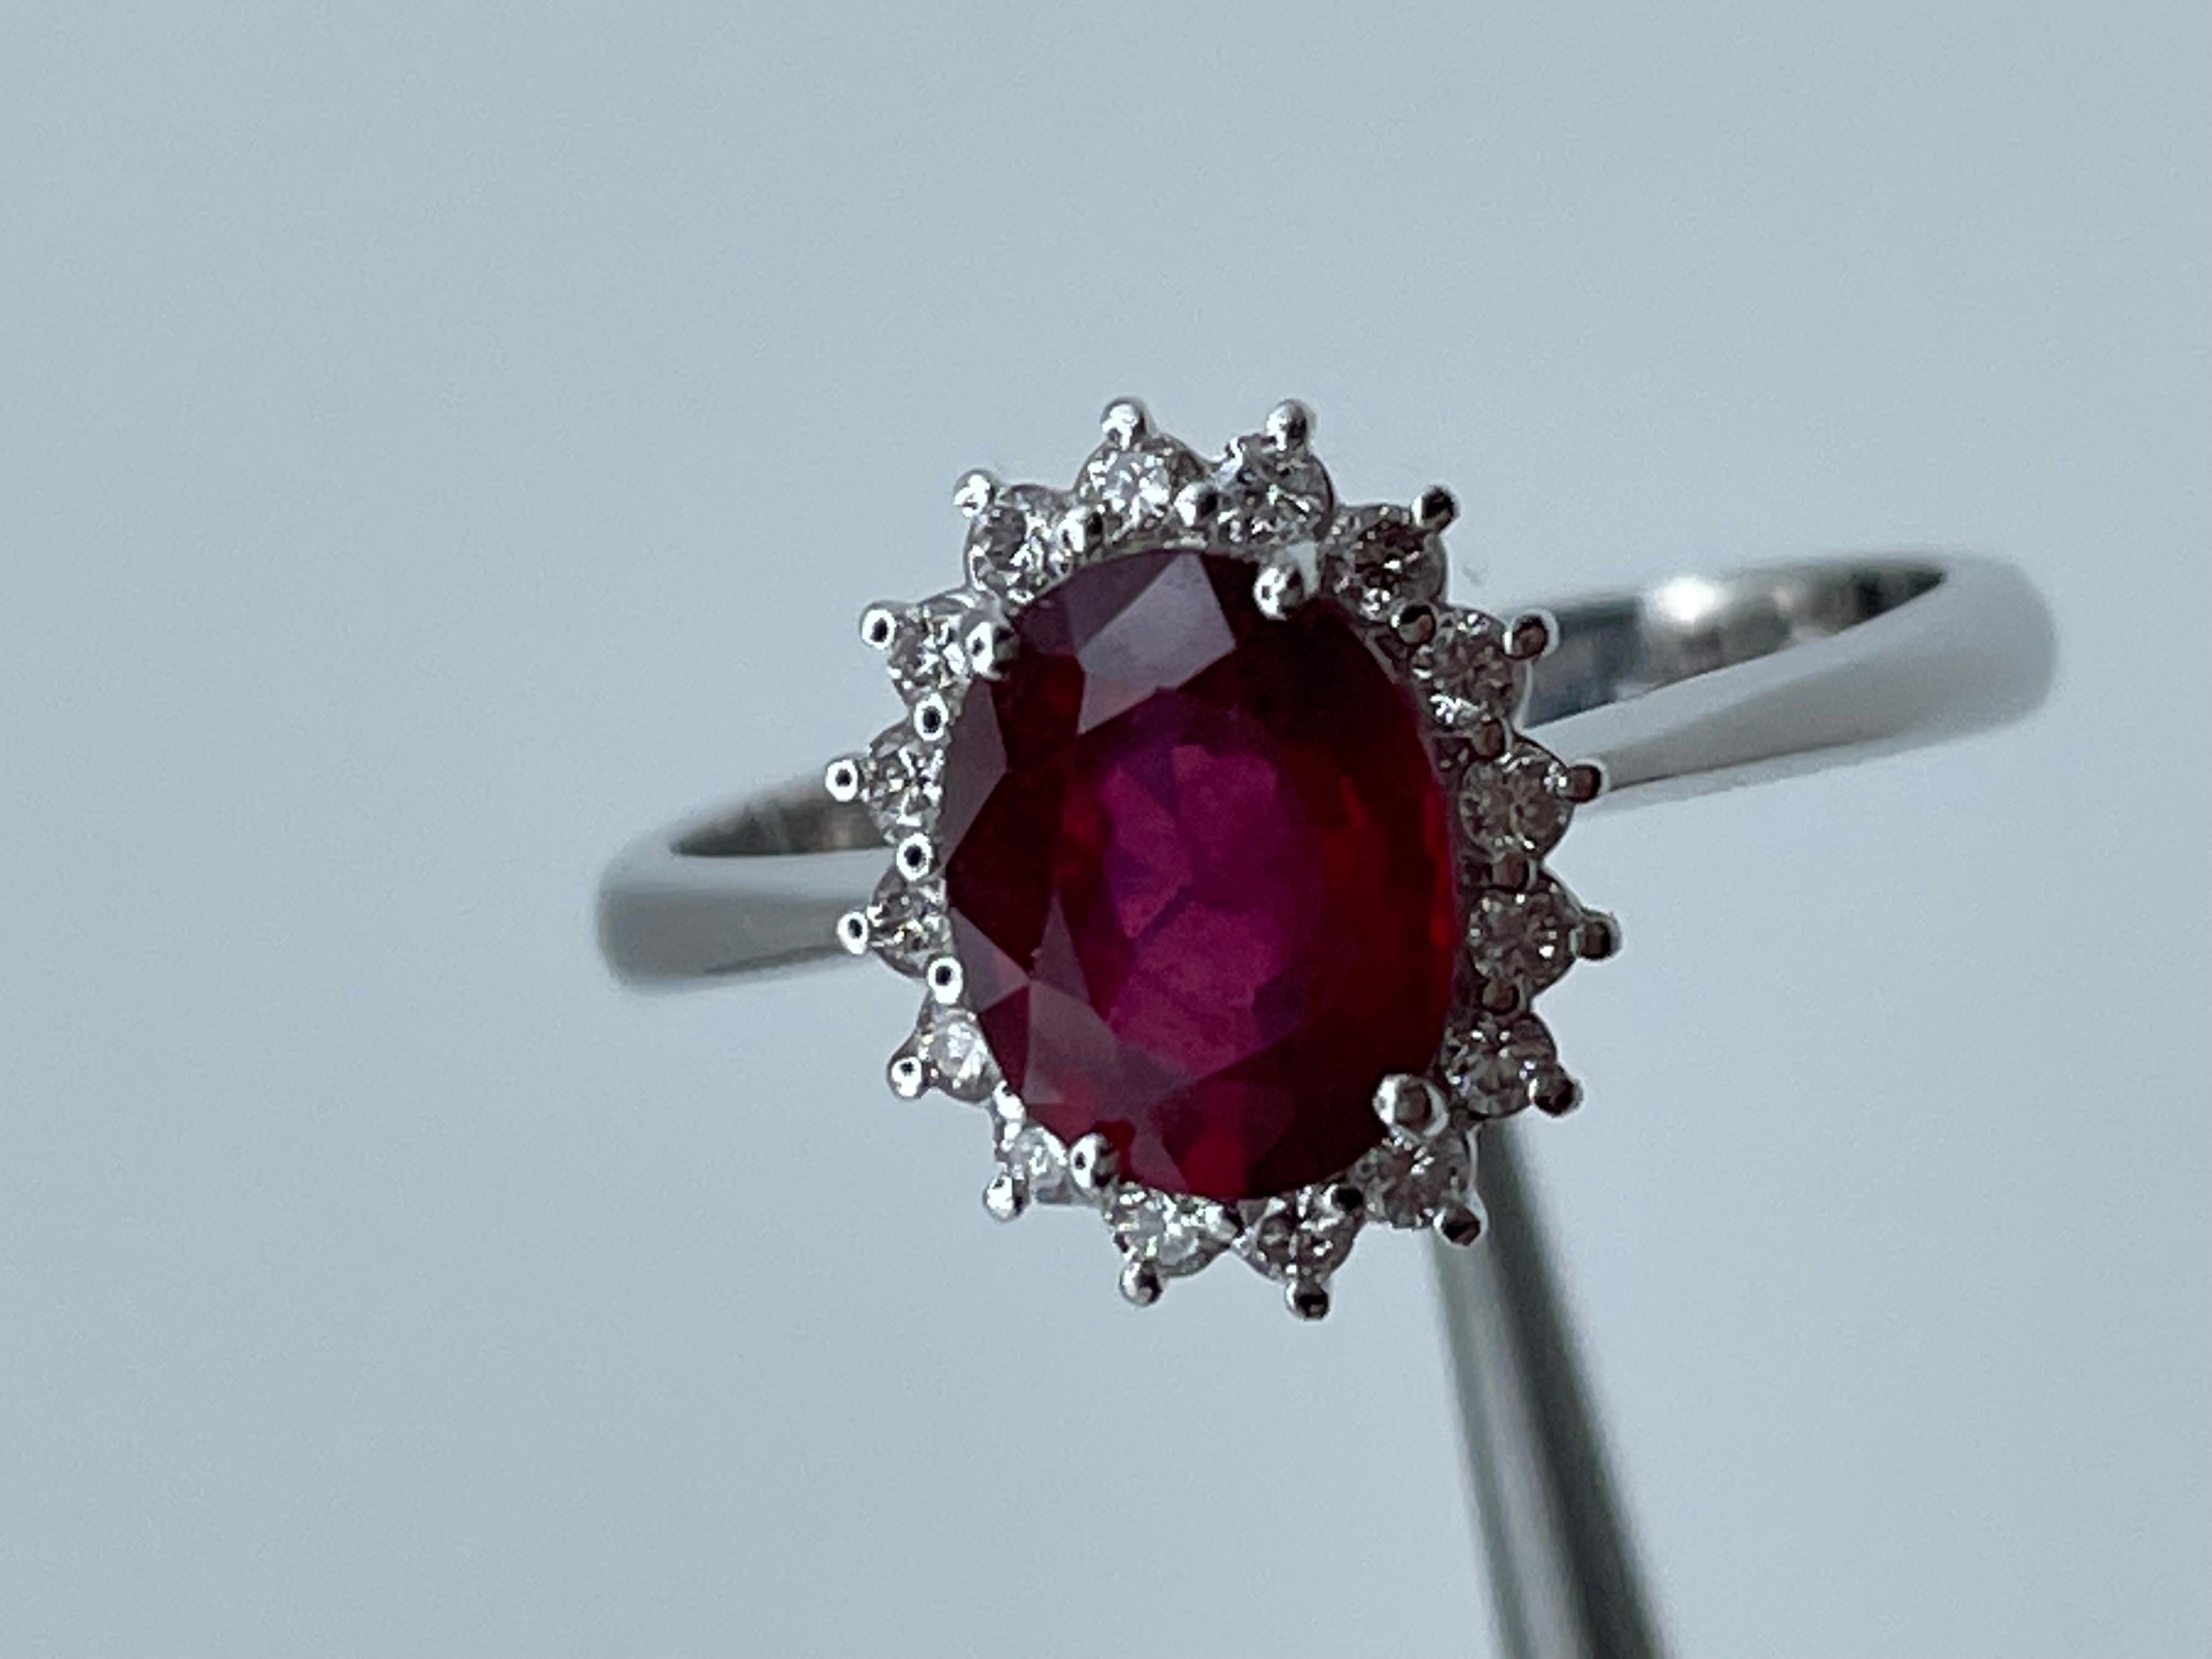 18 kt White Gold Ring, set with an Indian ruby ​​of ct 1.87 and brilliant cut diamonds, G color.vs1, ct 0.2;
It weighs 3,4 grams and measures 16 (on request it is possible to change the size at no additional cost. I make use of the collaboration of